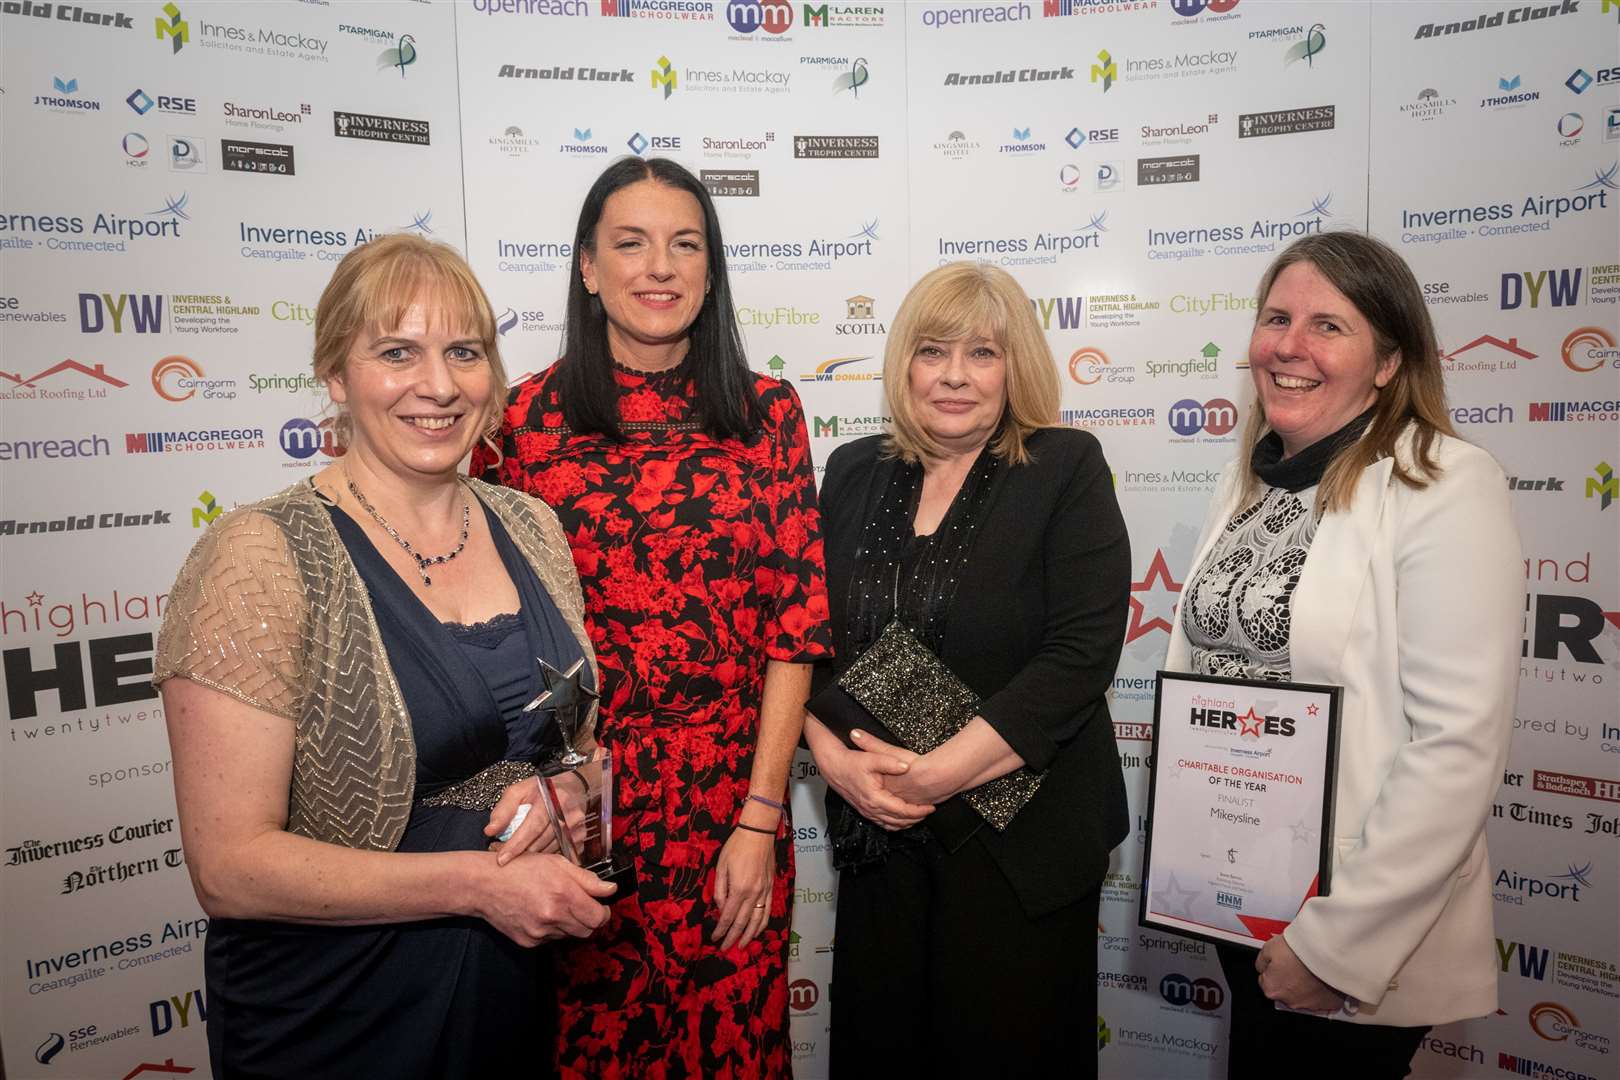 The Mikeysline team of chief executive Emily Stokes with Clare Gordon, Bonnie McColl and Maria Kelly. Picture: Callum Mackay